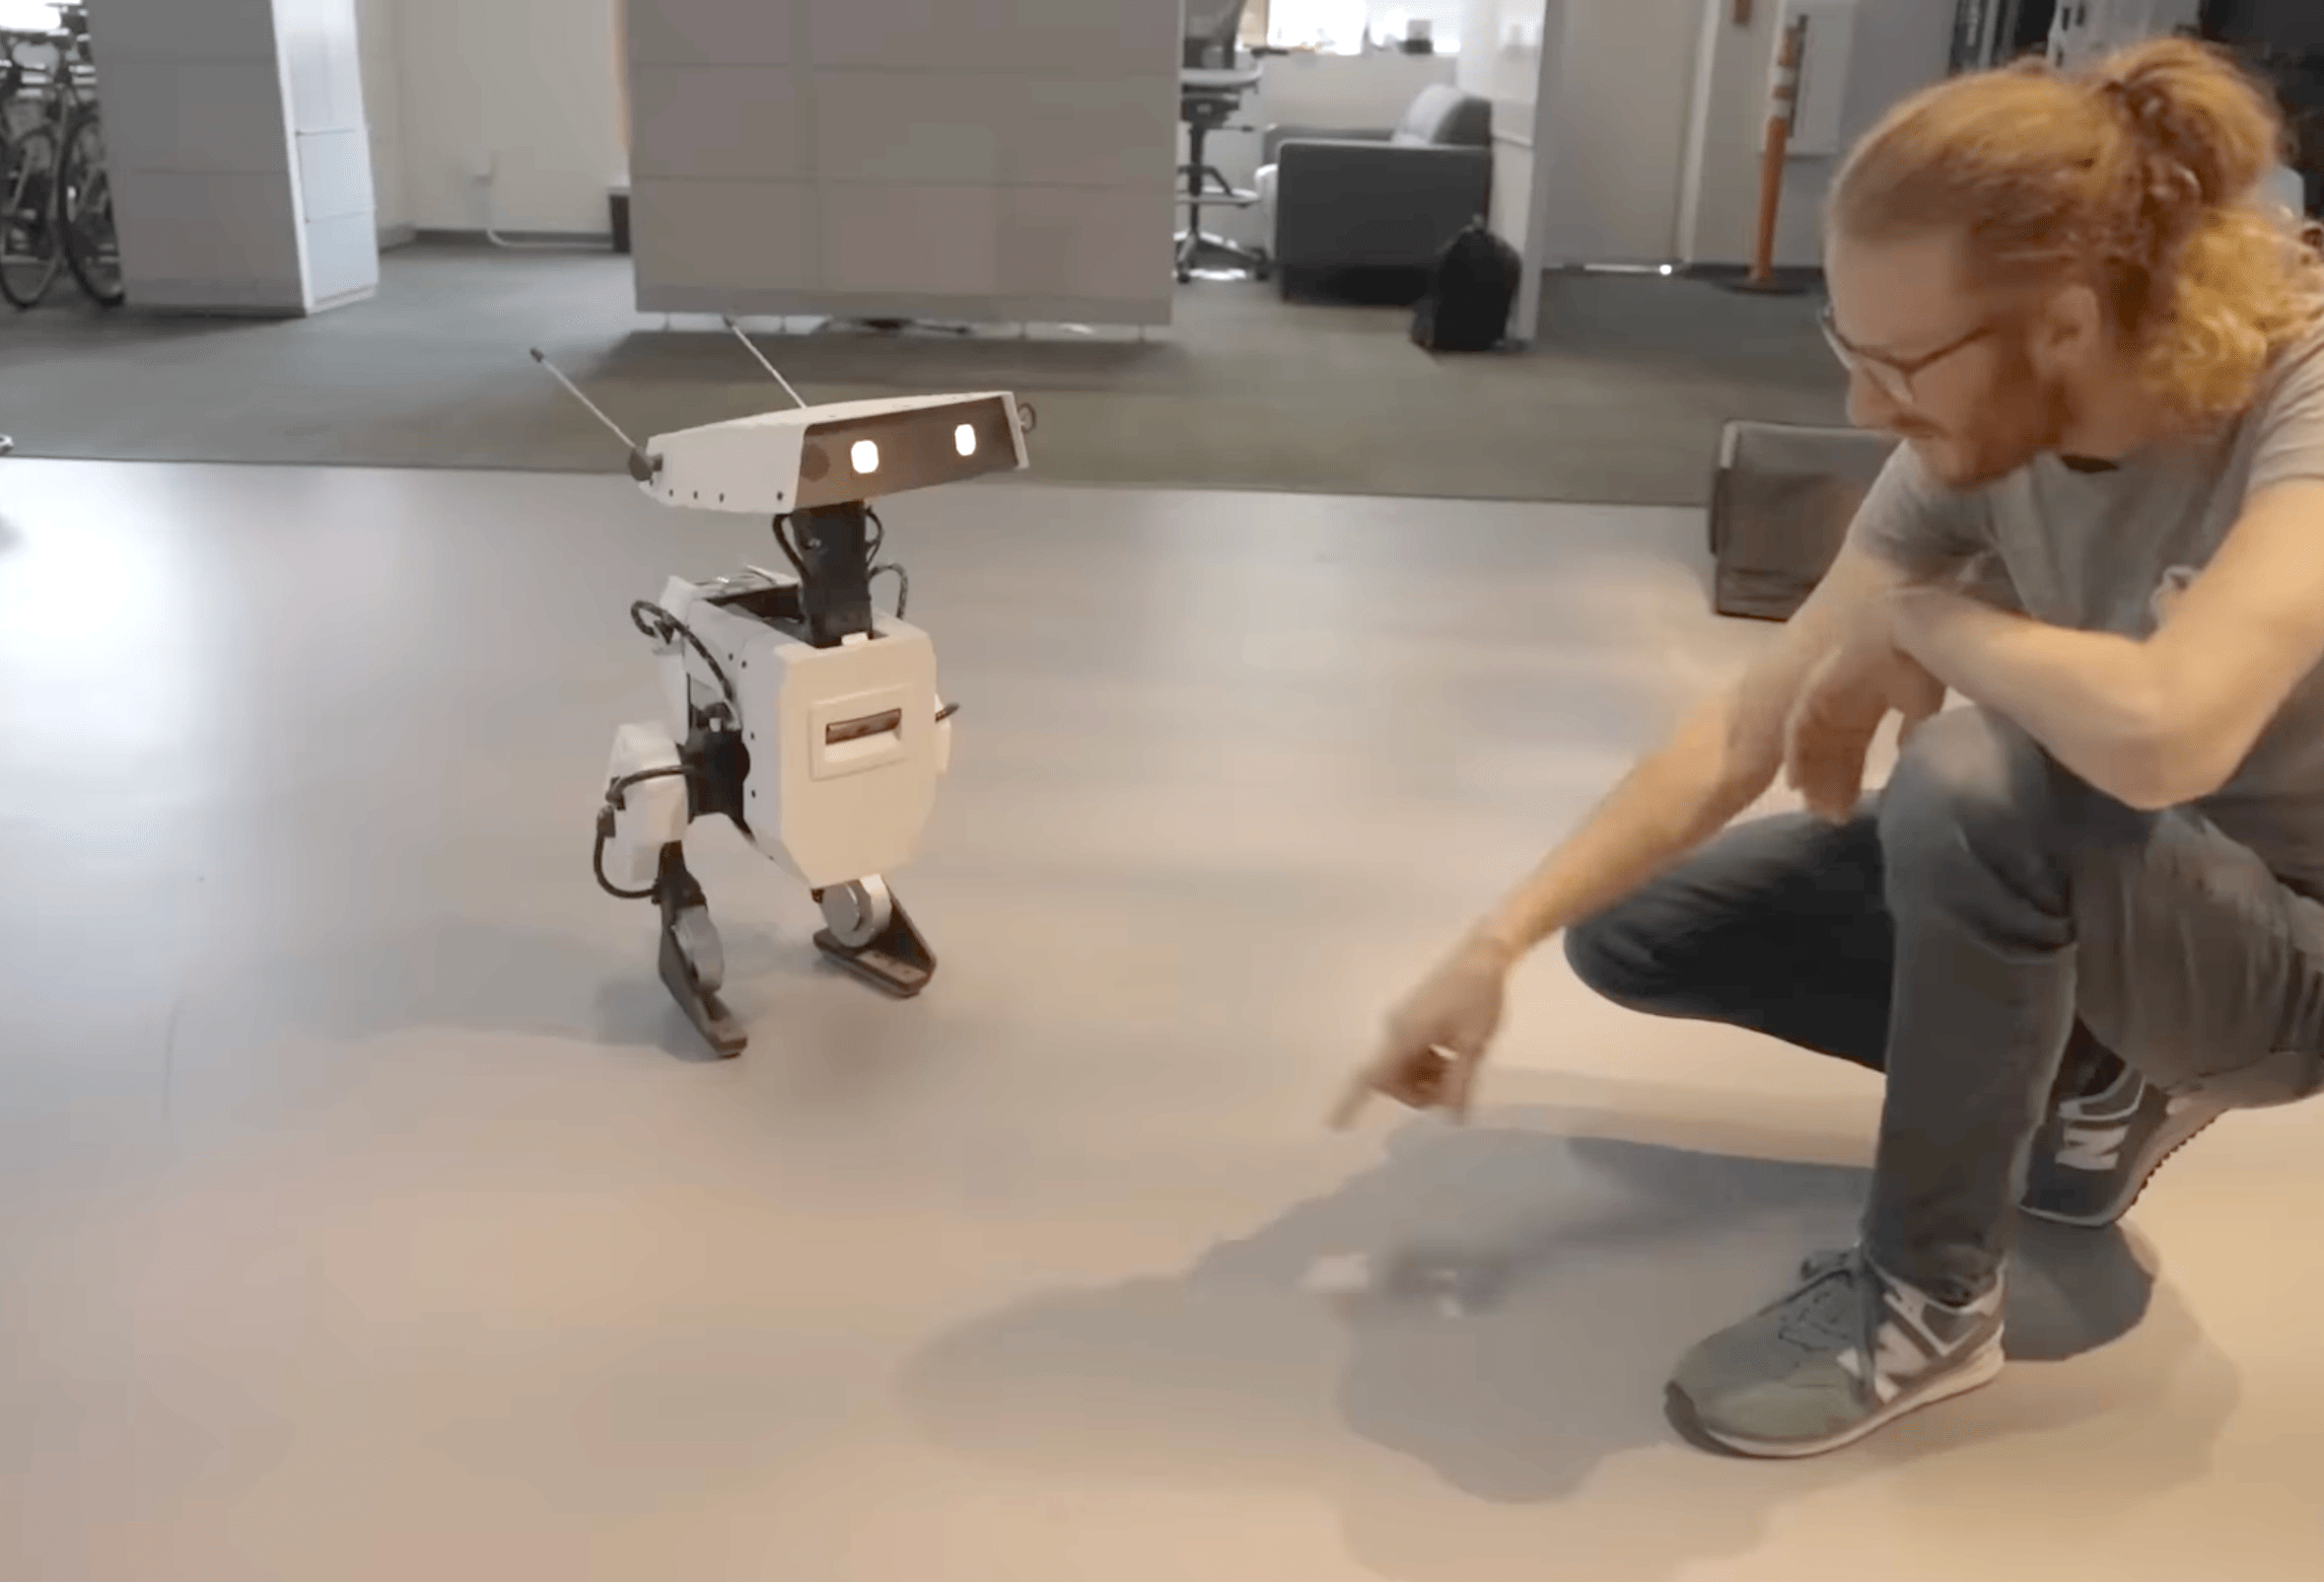 Disney’s Expressive Bipedal Robot: A Leap Forward In Emotion